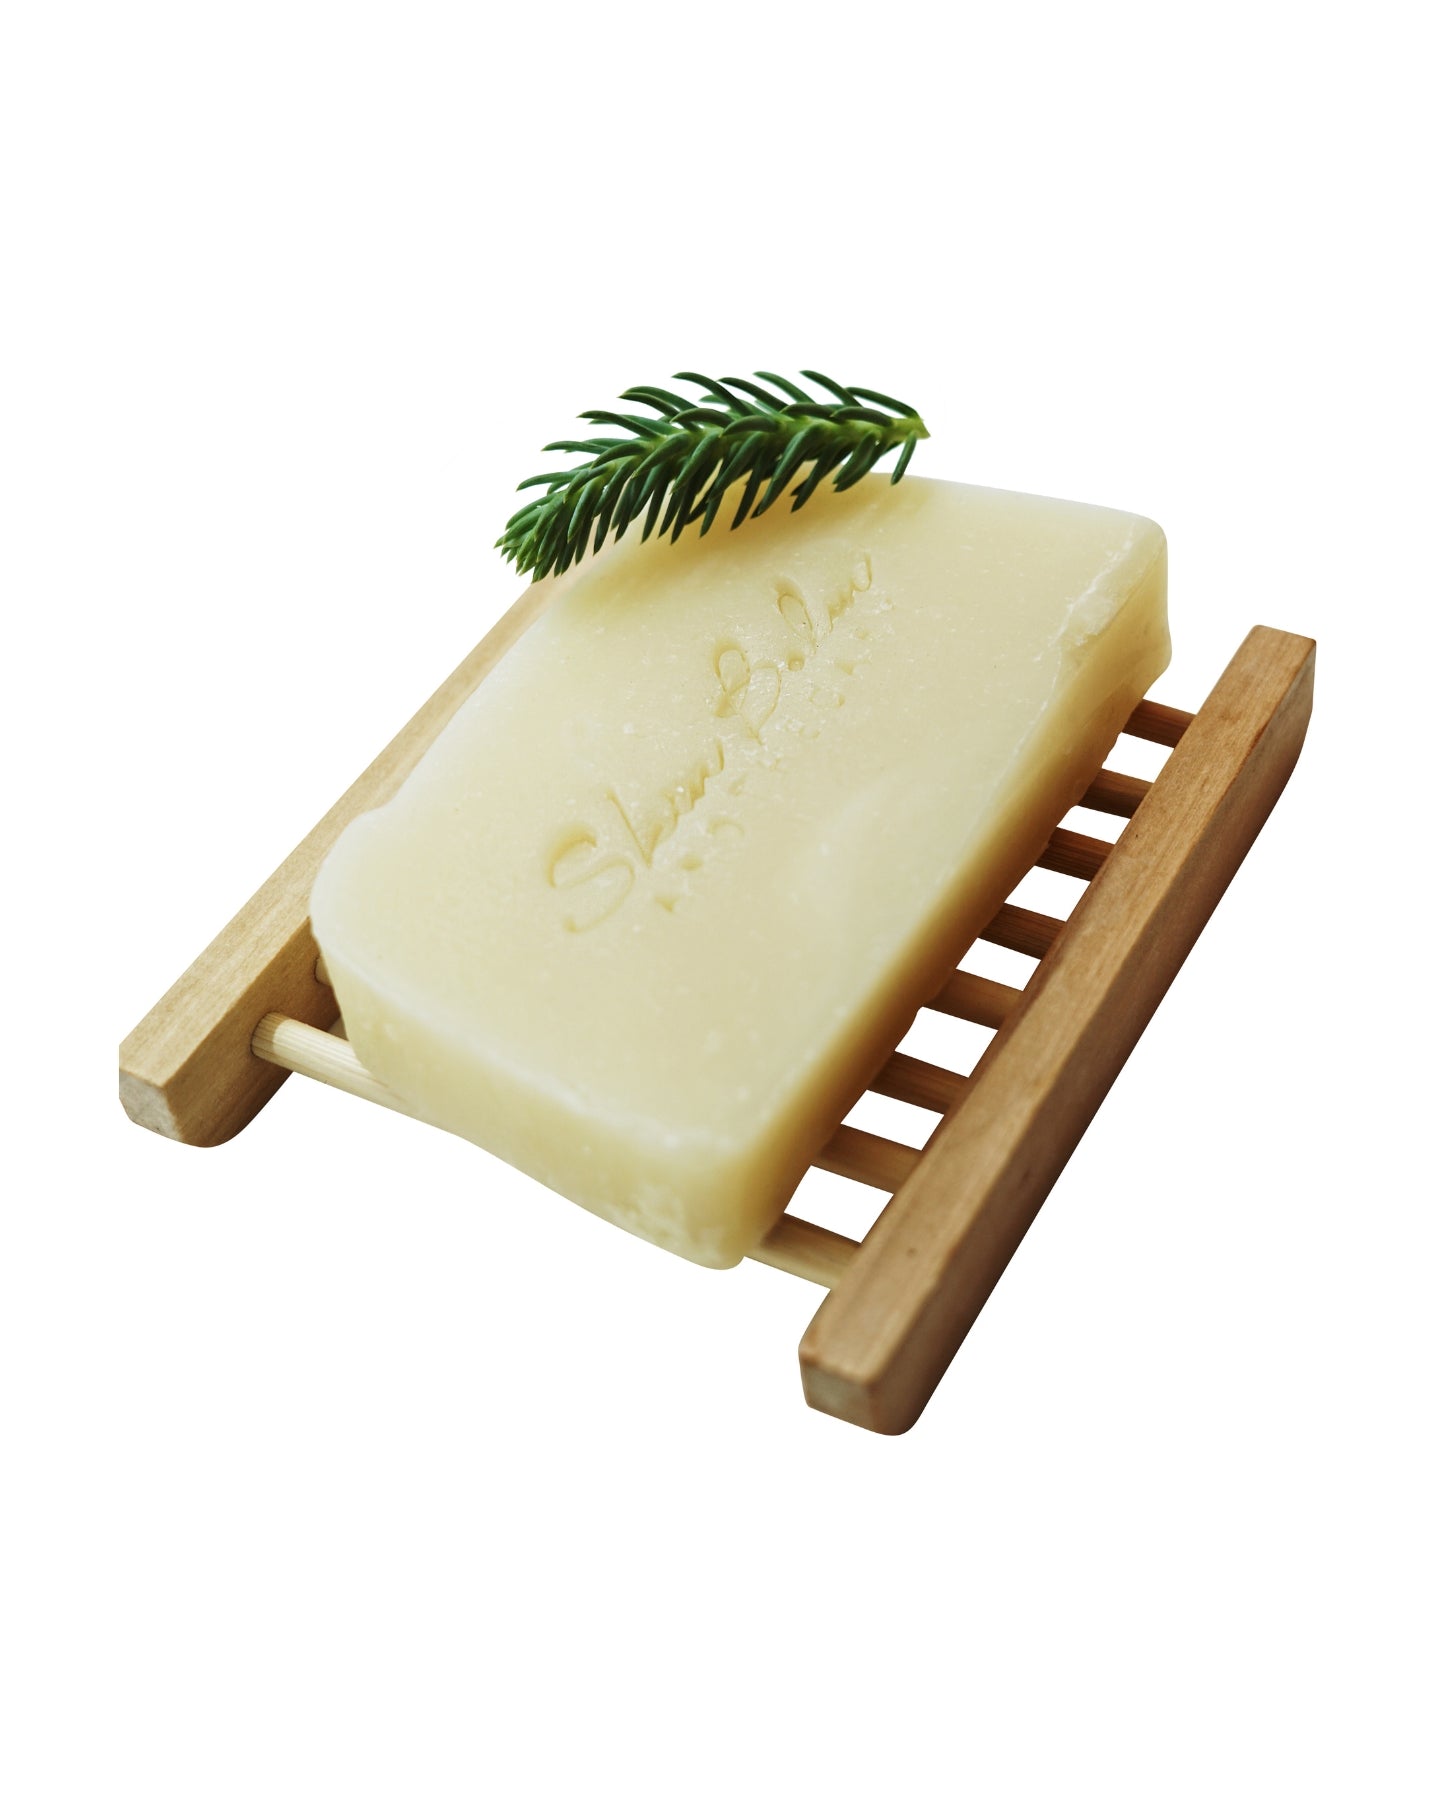 Nourish Shampoo Bar with Bamboo Soap Holder against a white background.